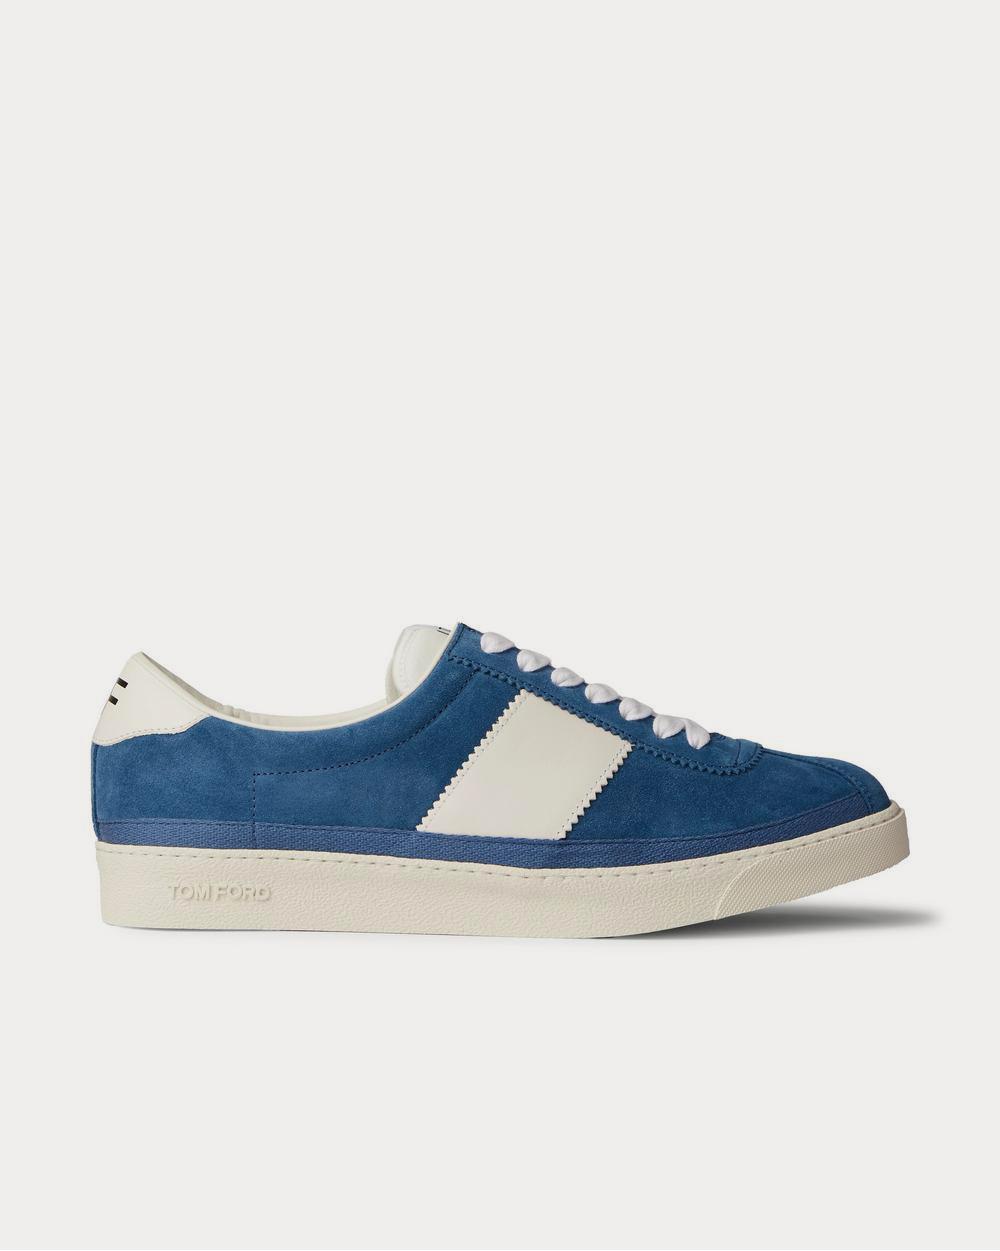 Tom Ford - Bannister Leather-Trimmed Suede  Blue low top sneakers